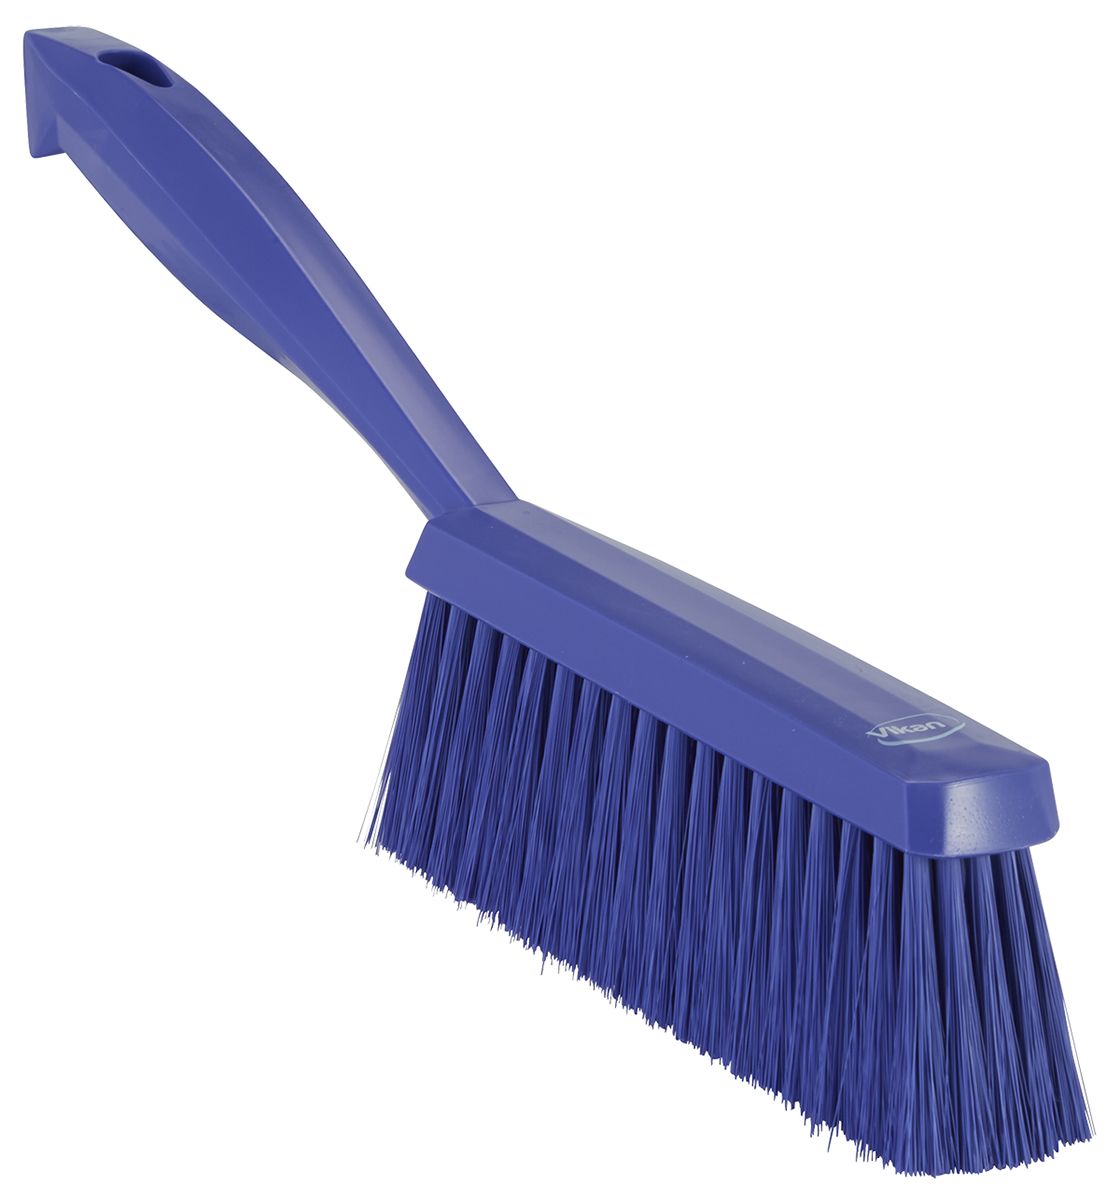 Vikan Purple Hand Brush for Brushing Dry, Fine Particles, Floors with brush included